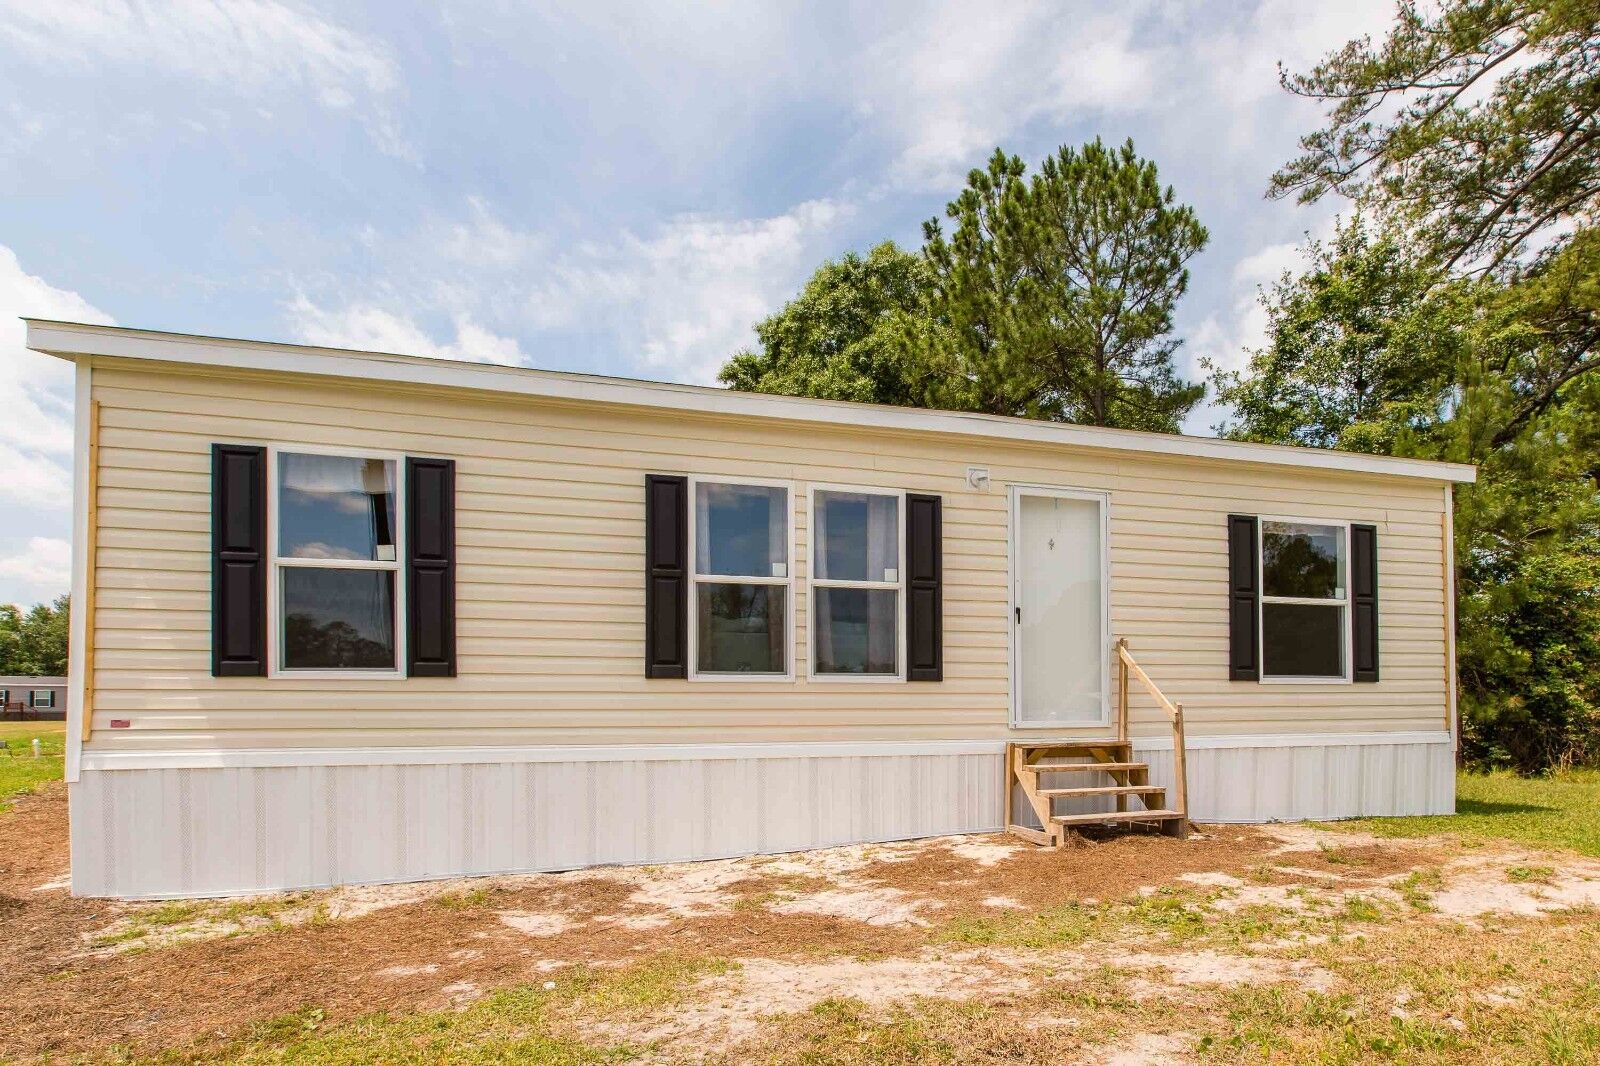 2023 LIVE OAK 3BR/2BA 26×36 936’Sq Doublewide Mobile Home for all FLORIDA!